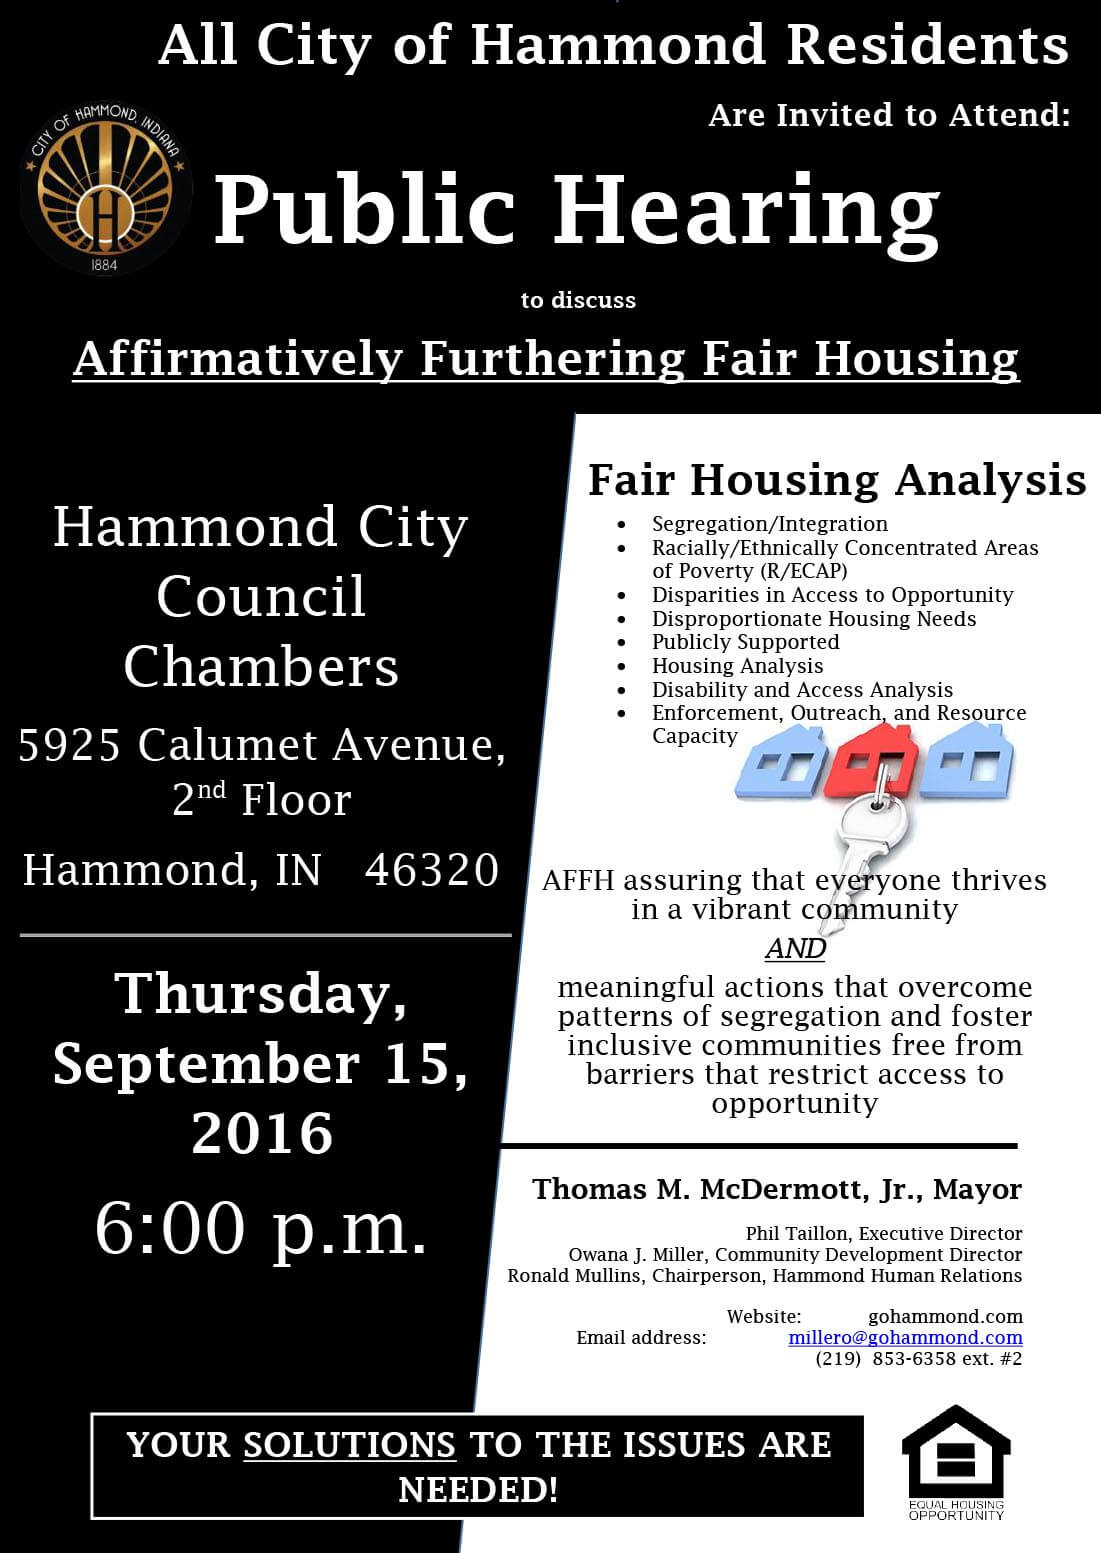 Public Hearings to discuss Affirmatively Furthering Fair Housing